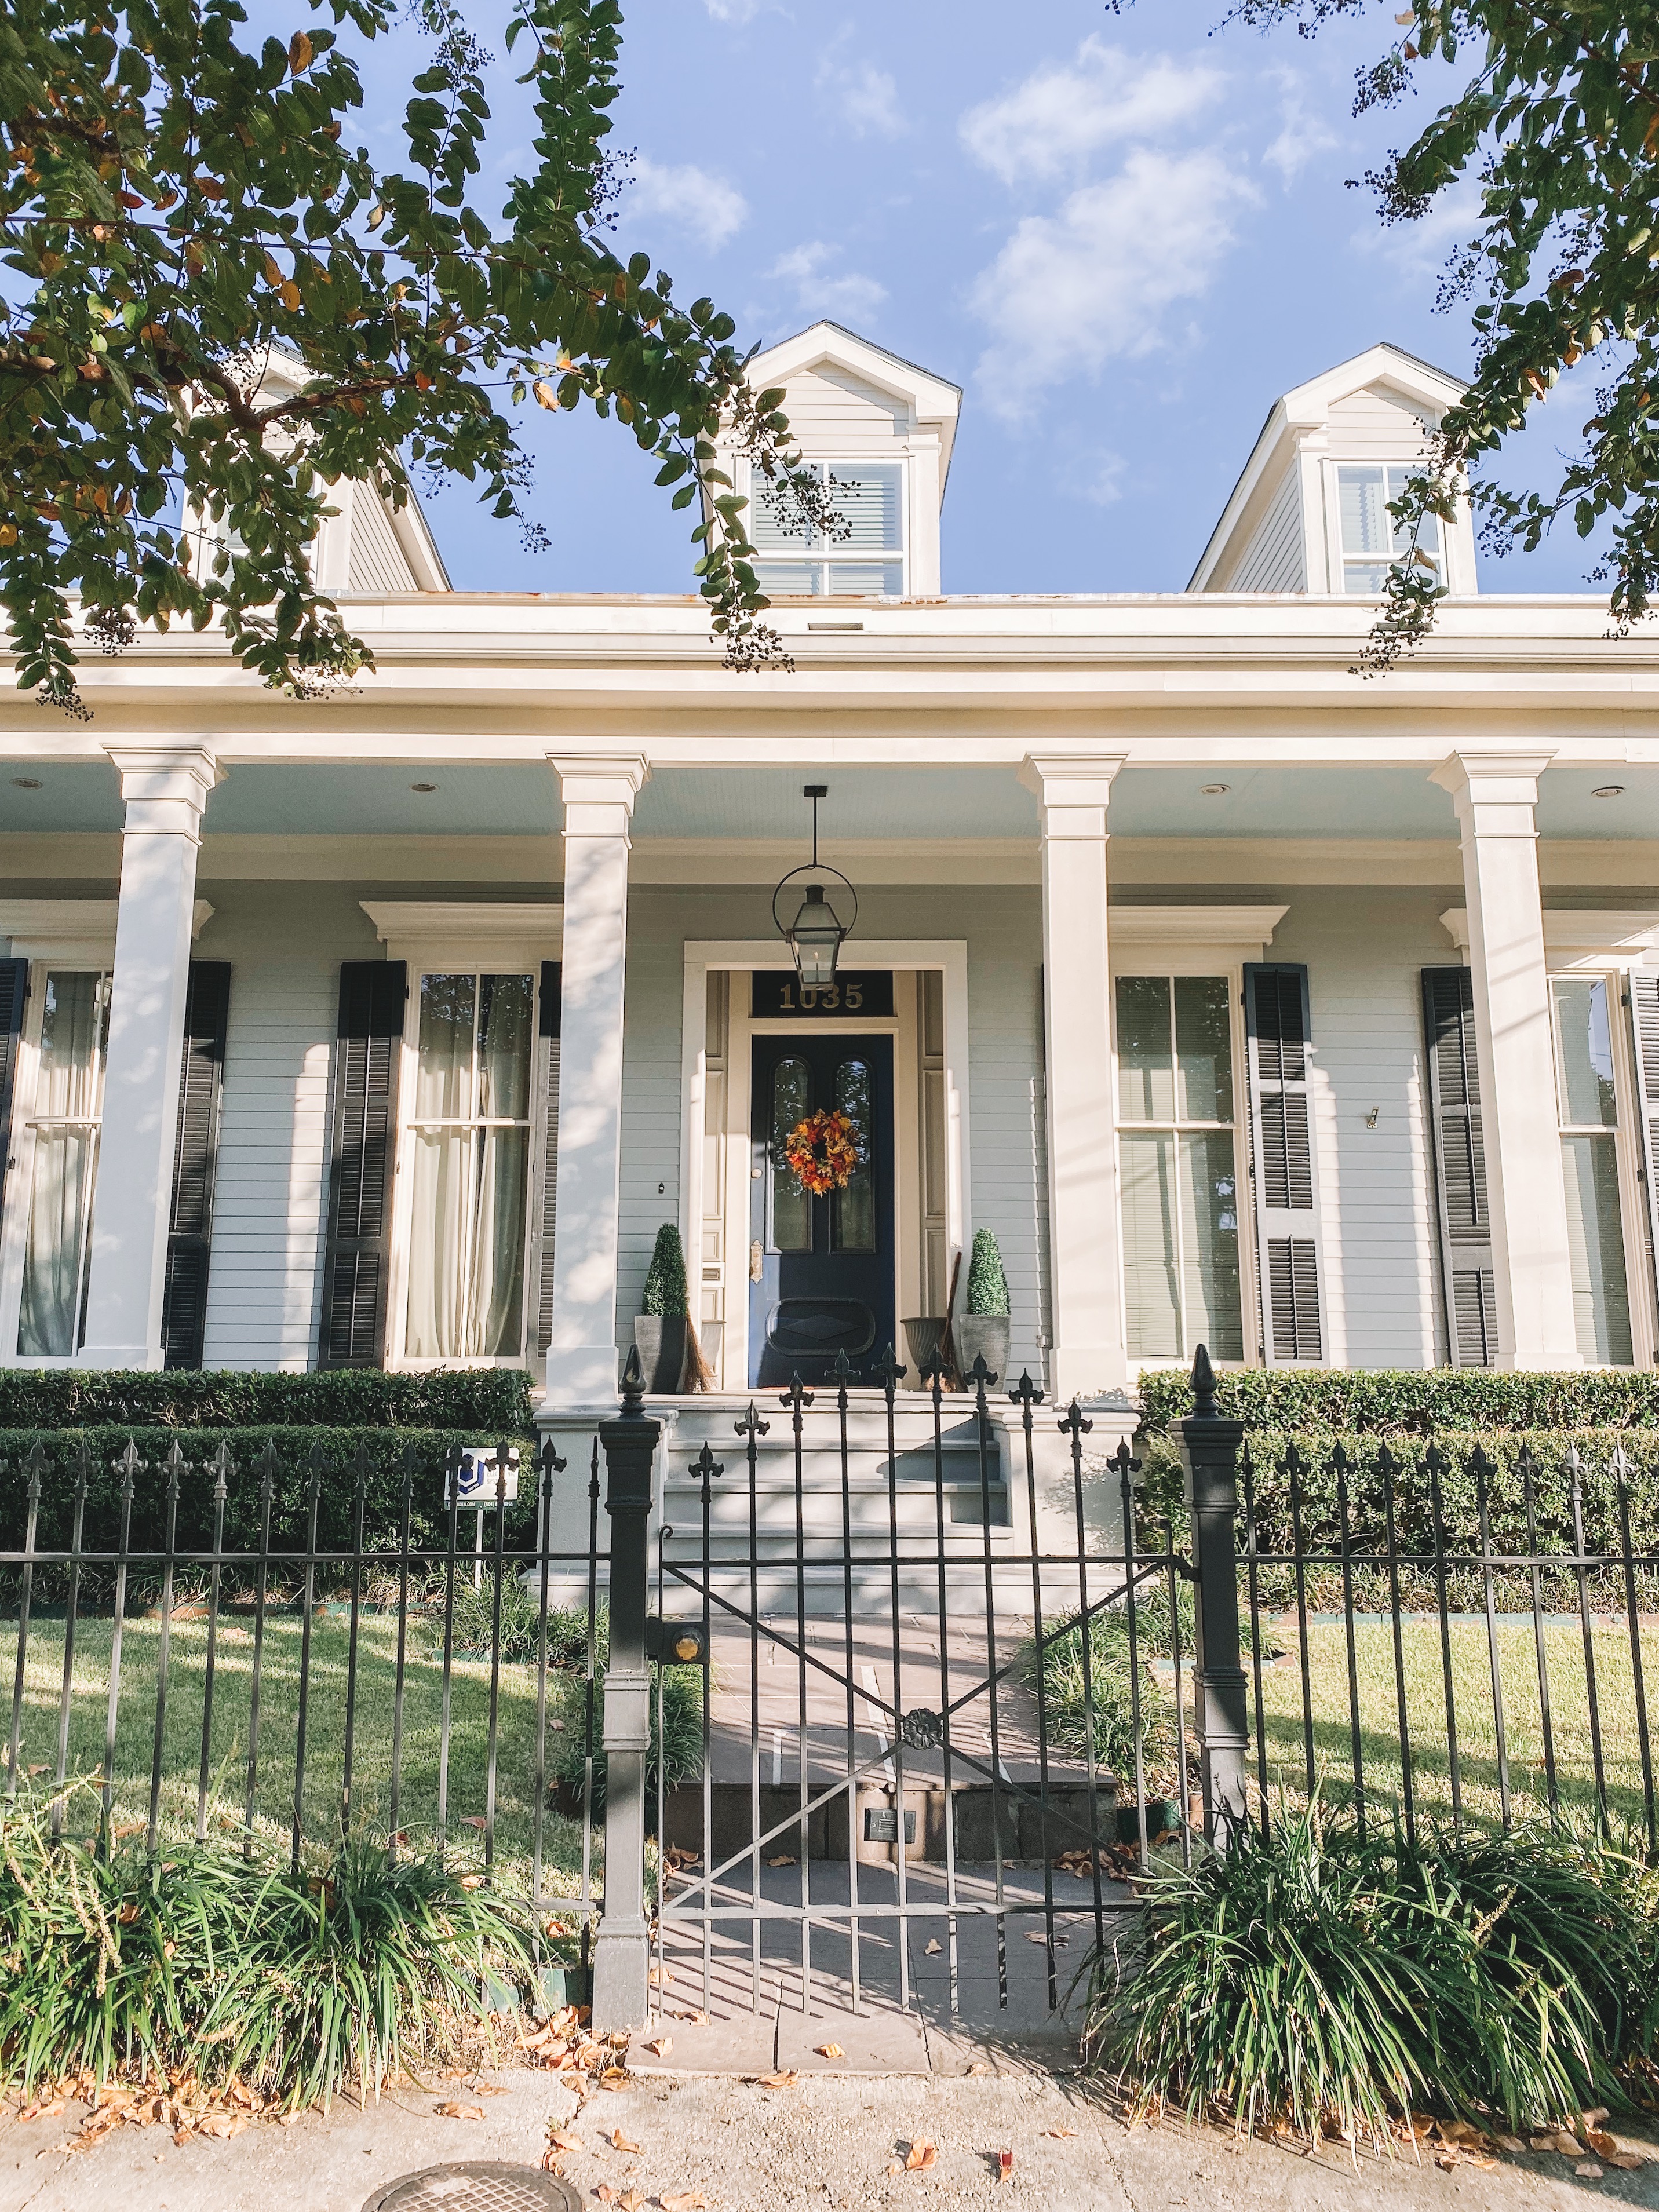 homes of uptown new orleans